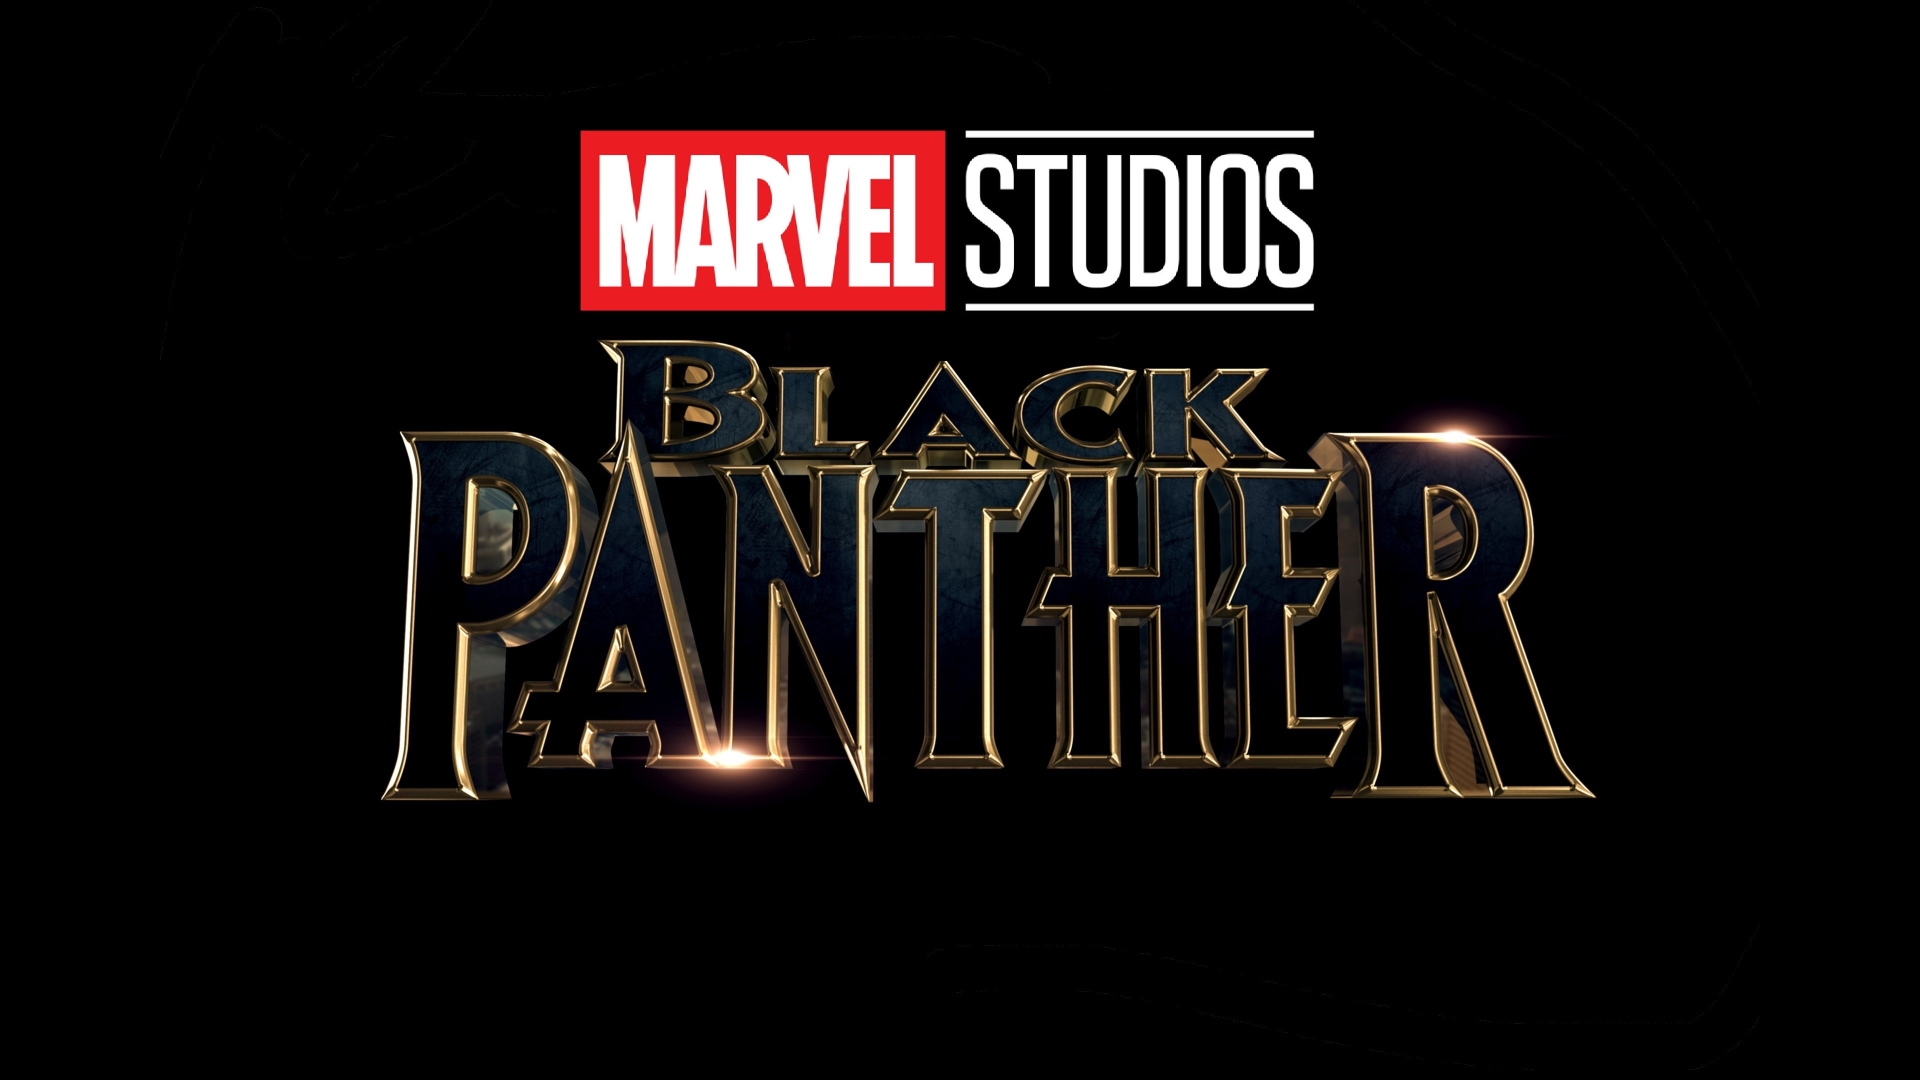 The Black Panther 18 Movie Poster 19 X 1080 Hdtv 1080p Hd Wallpaper Hdwallpapers Site